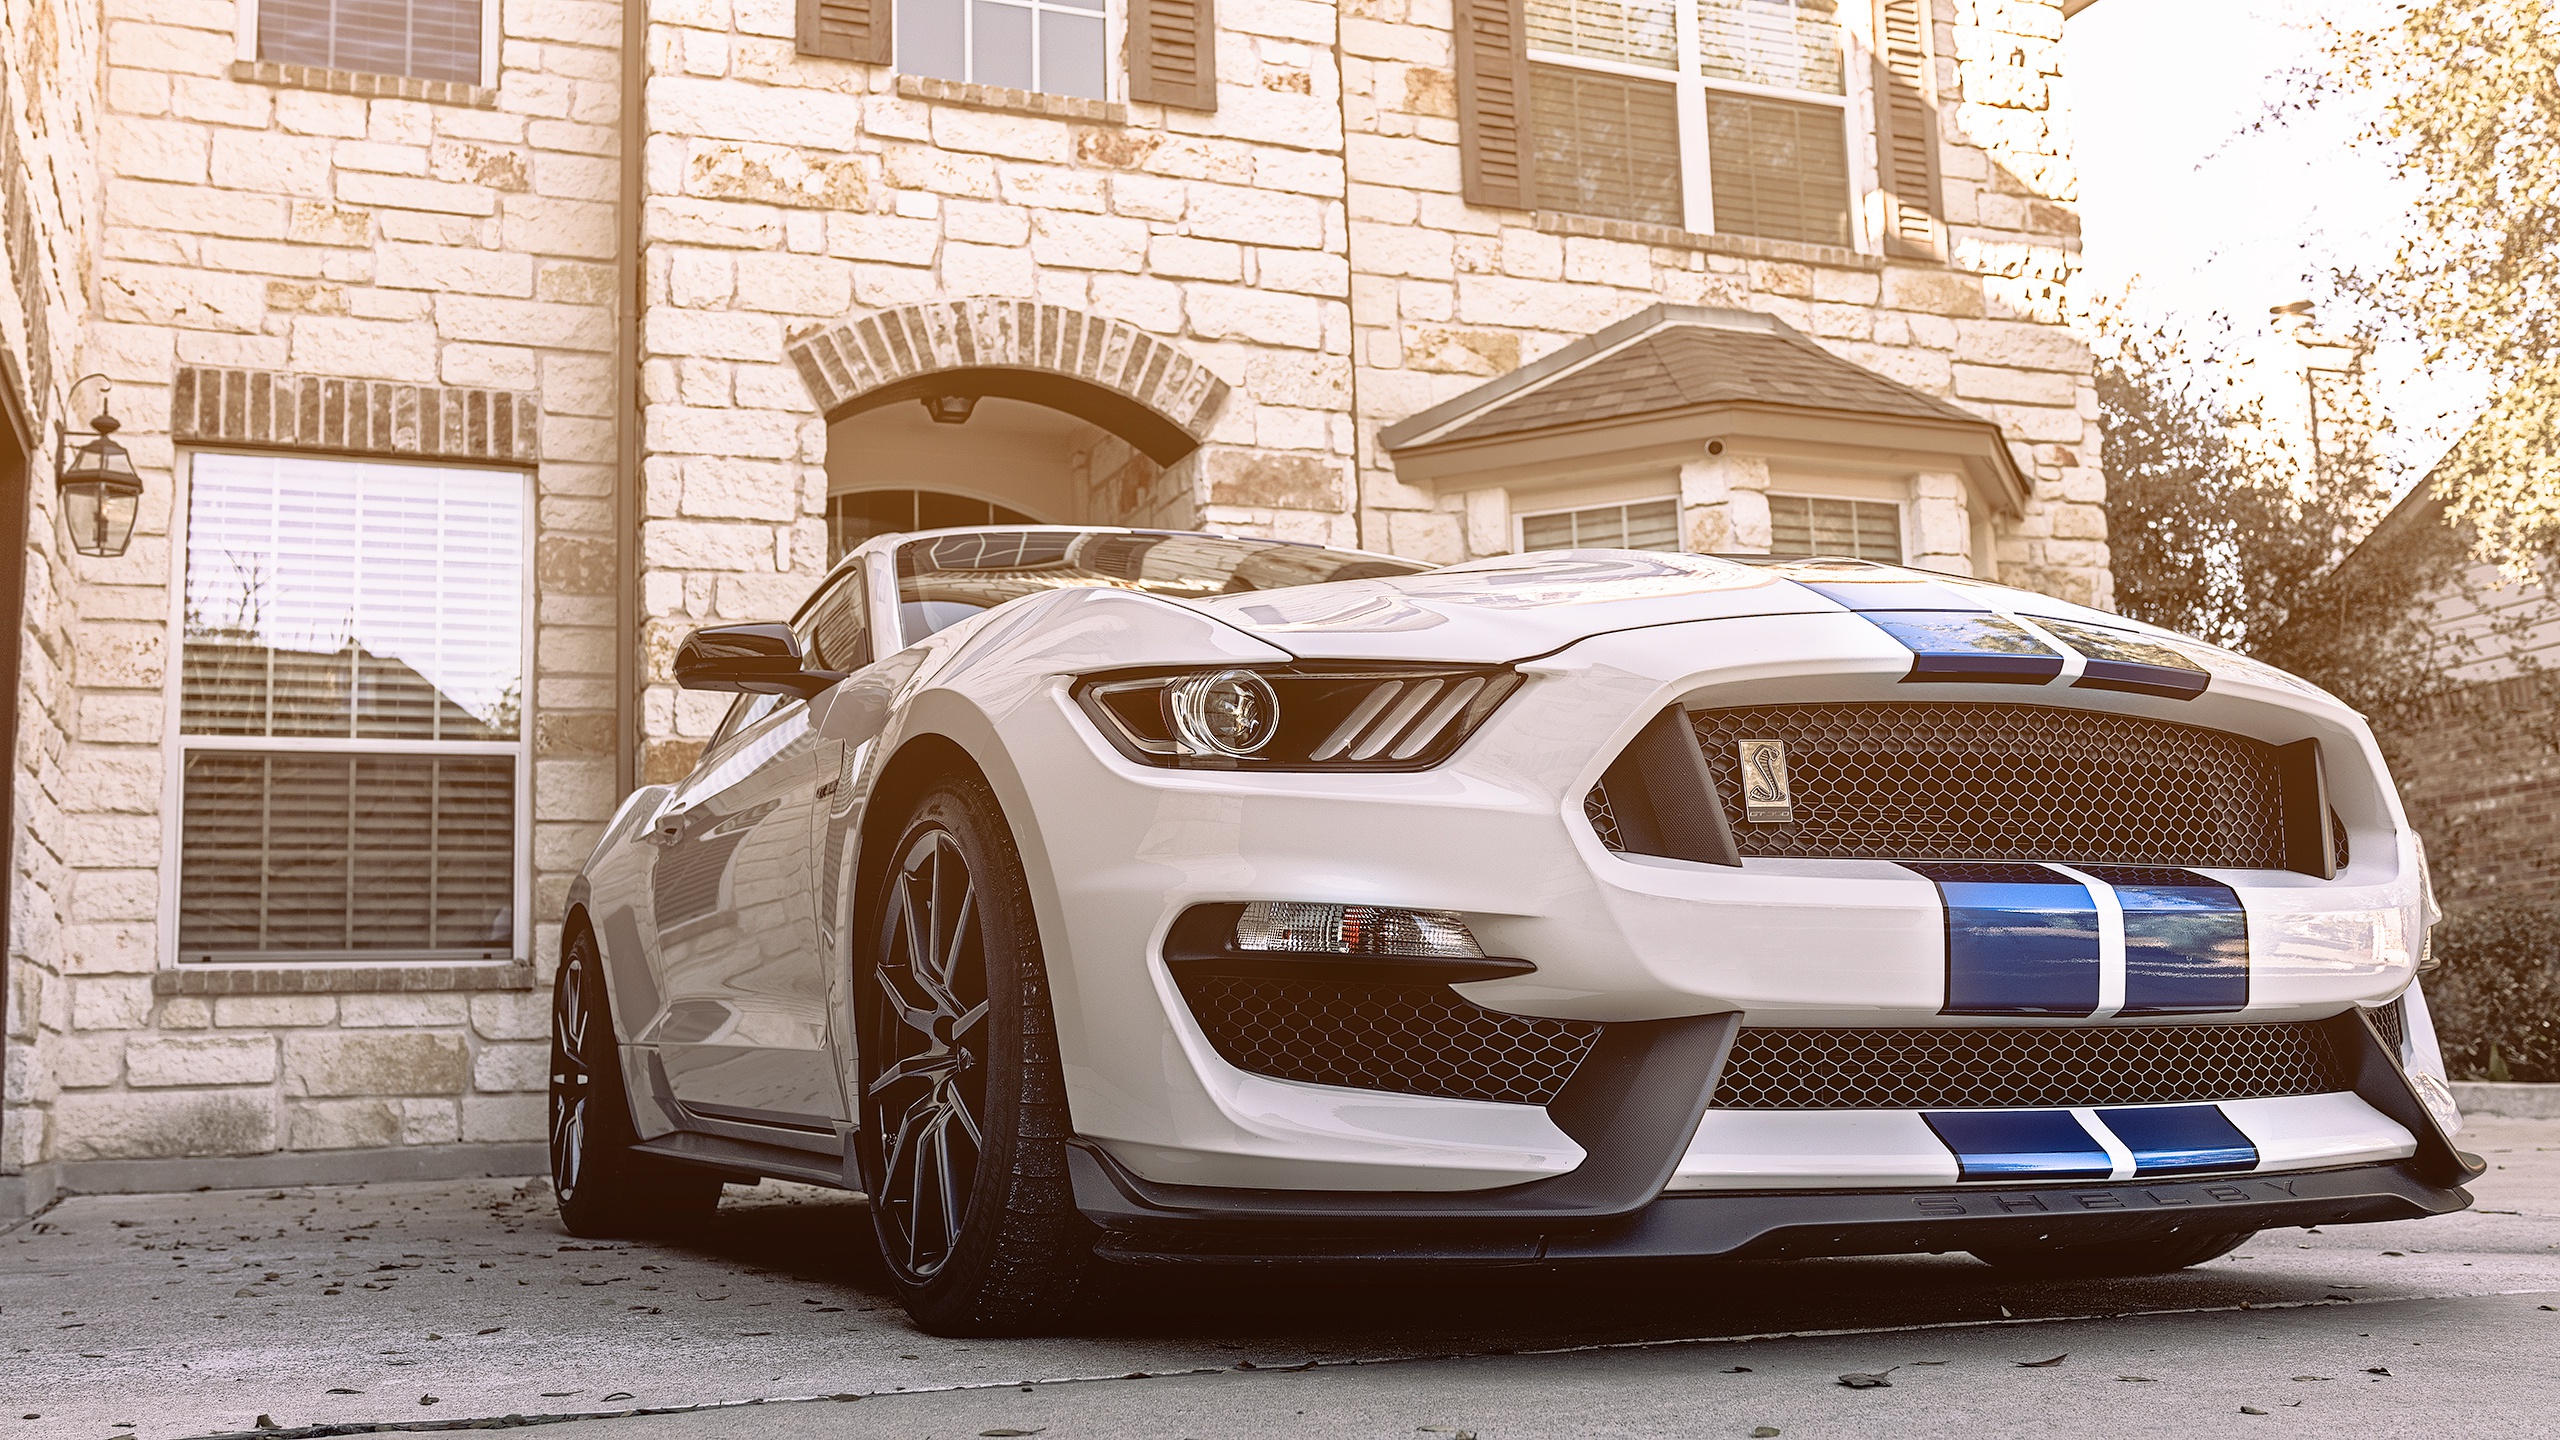 2018 Ford Mustang Shelby Gt350 Wallpaper Hd Car Wallpapers Id 9531